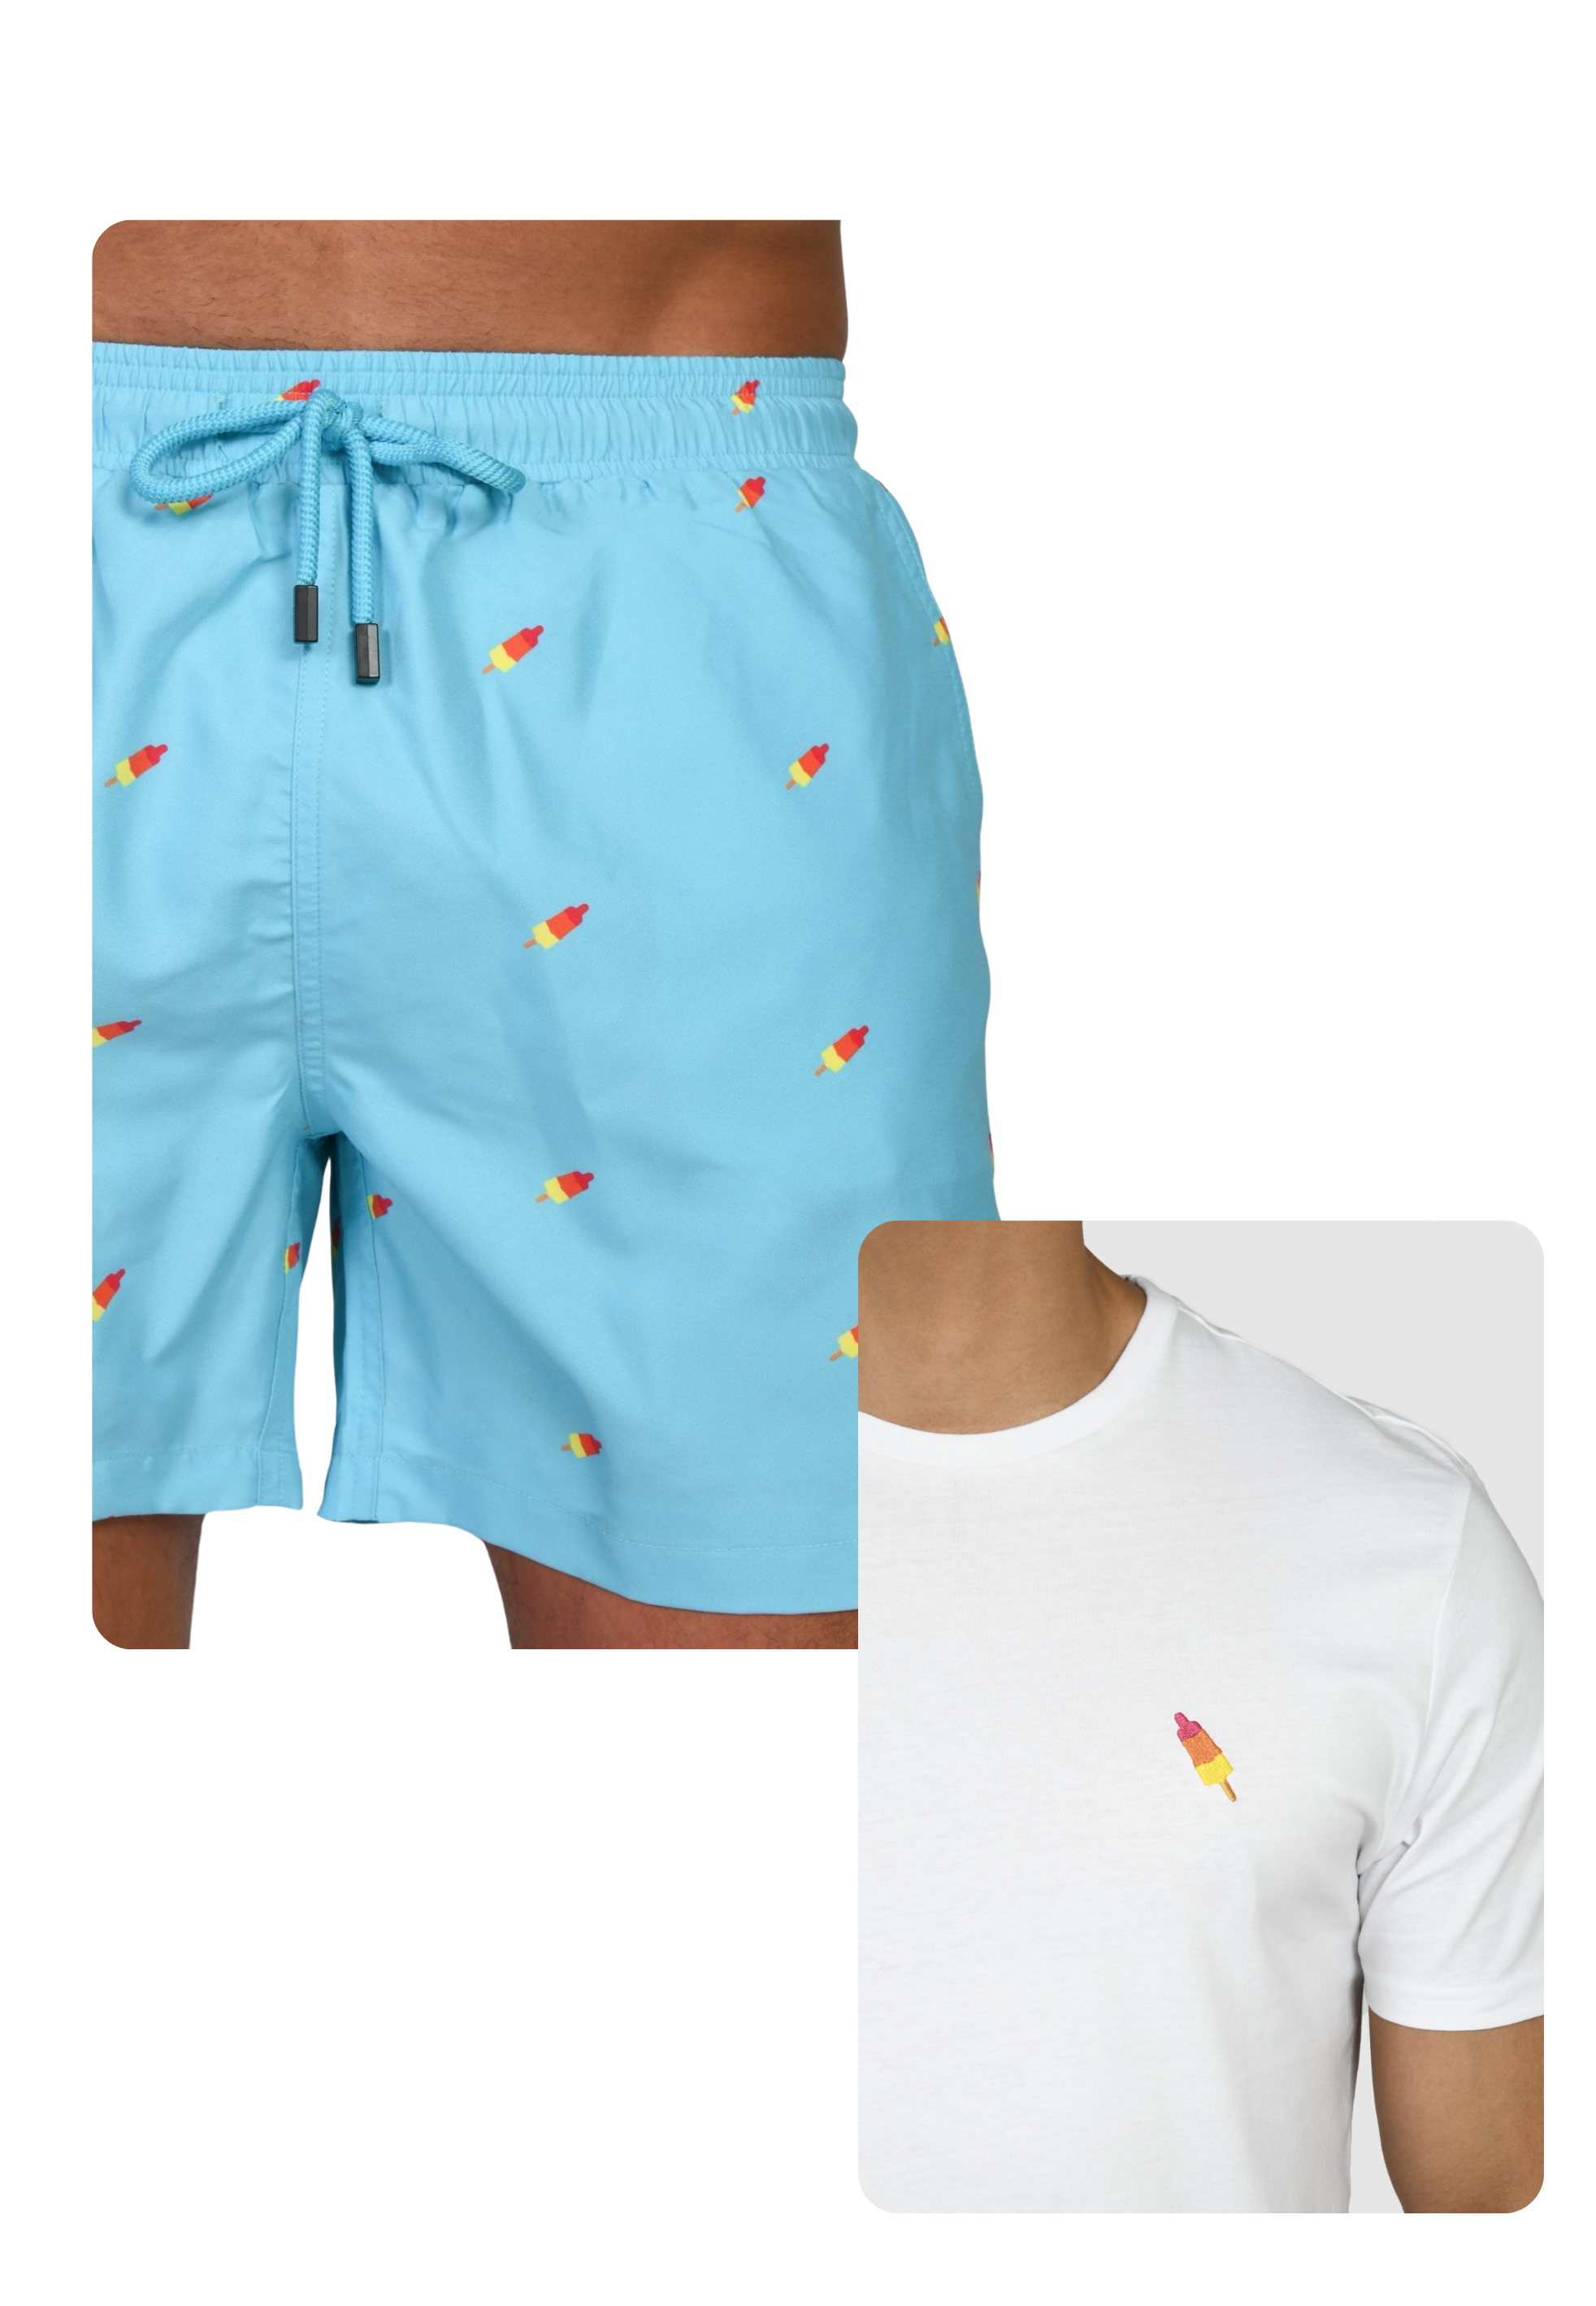 Icelolly Swim Trunks and T-shirt Bundle